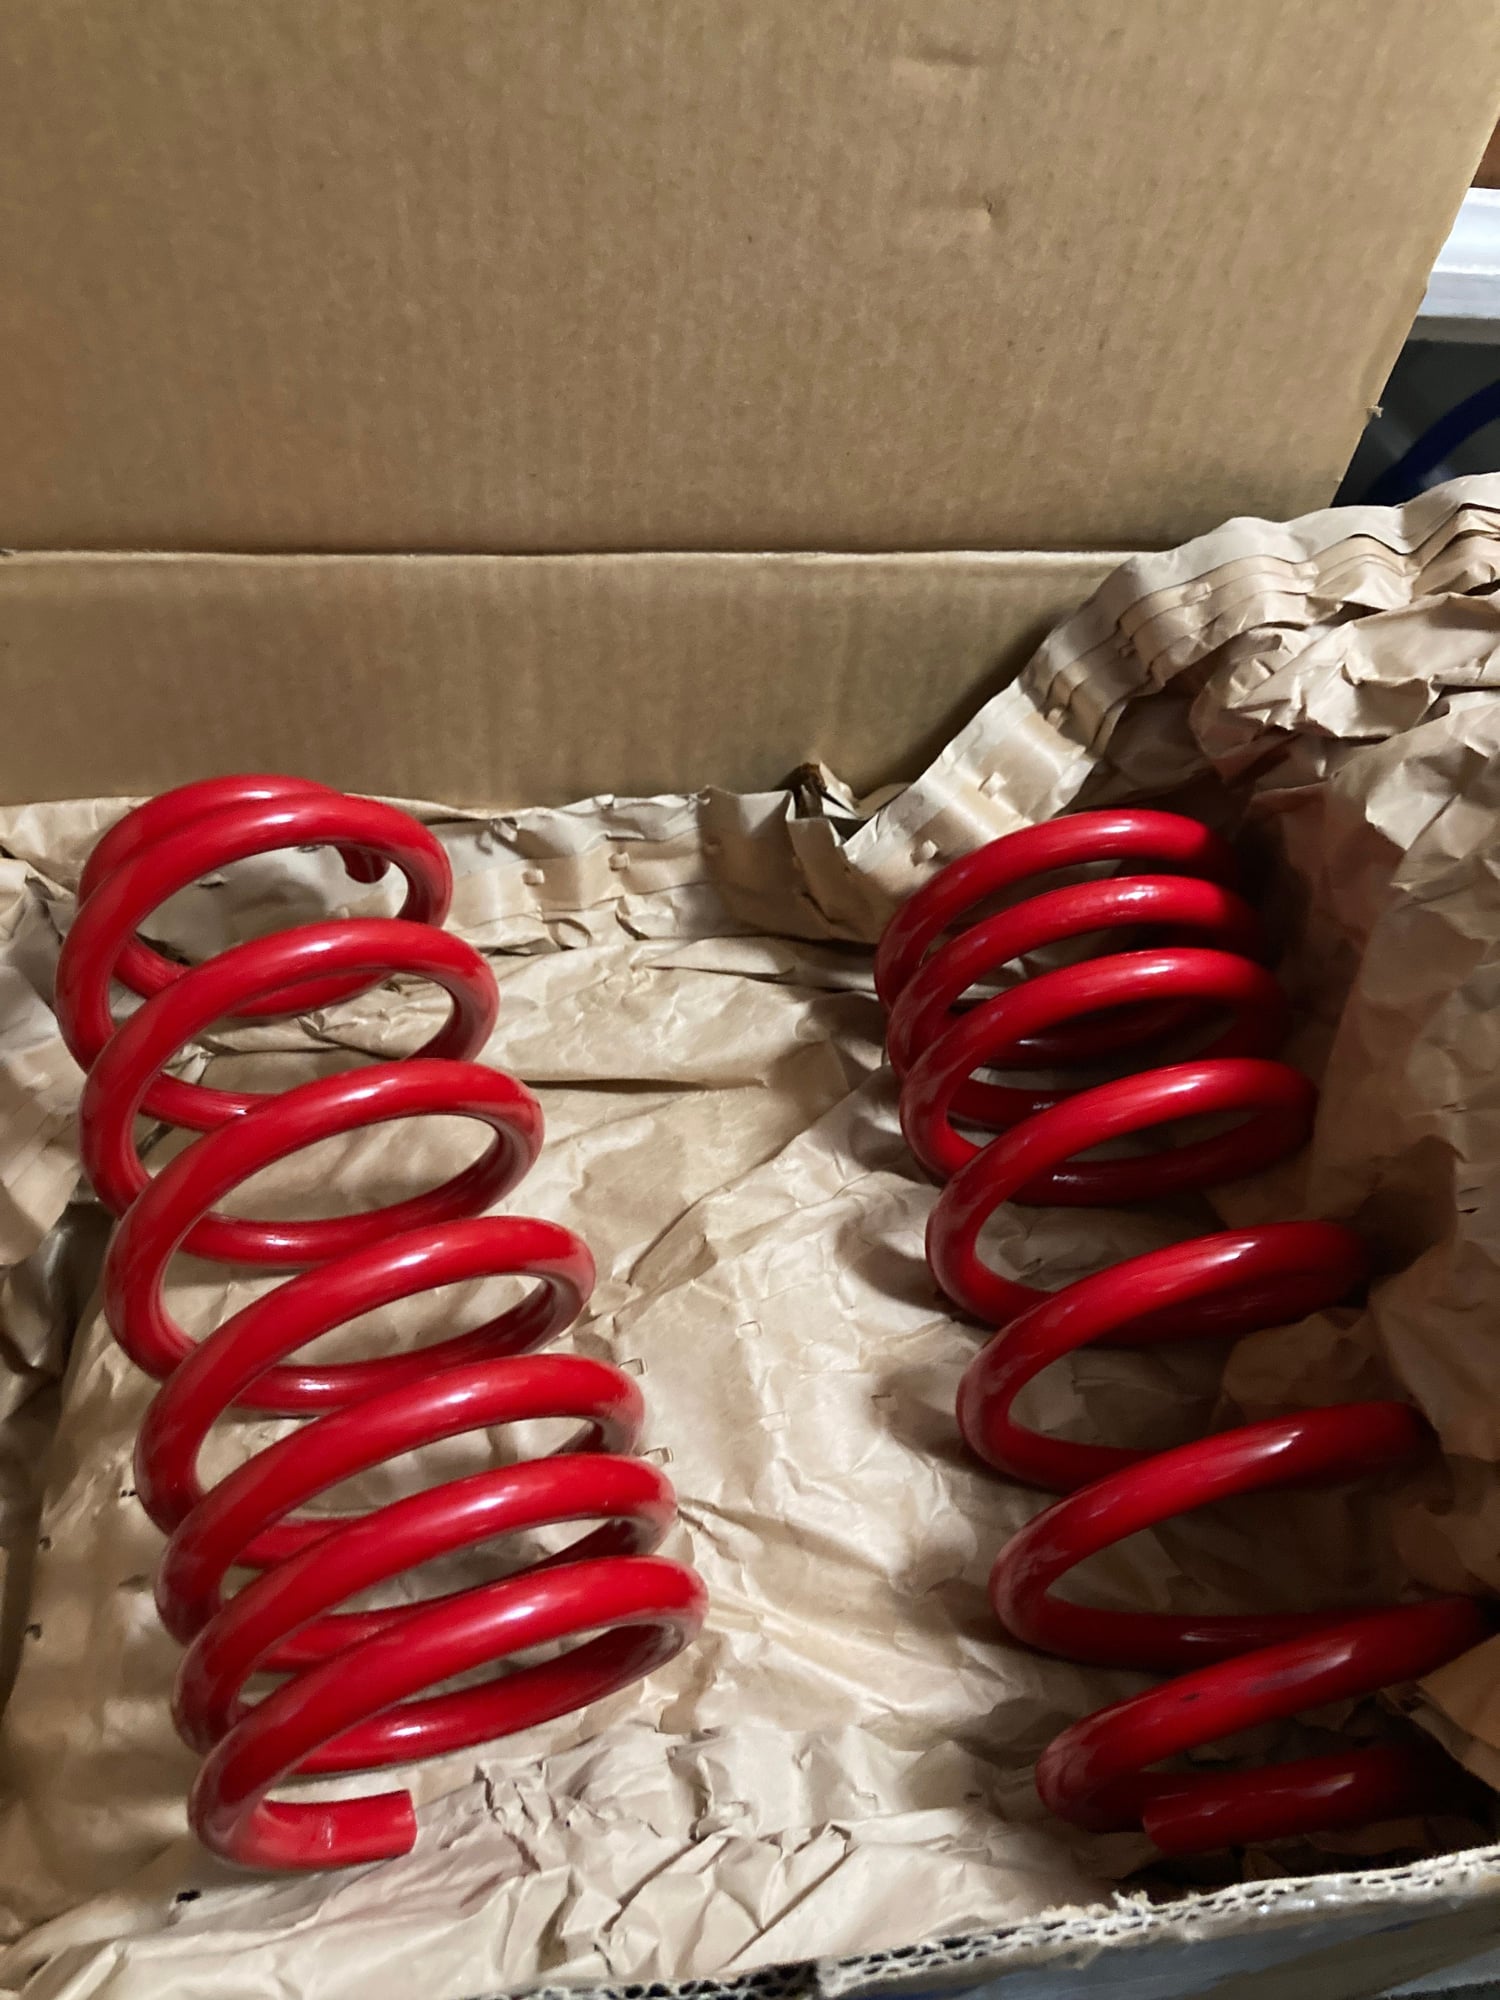 Steering/Suspension - H&R Lowering Springs Powder-Coated Red - Used - 2013 to 2015 Mini R60: Countryman - 2013 to 2015 Mini R56: "Mk II" Mini Hatch/Hardtop range - Buffalo, NY 14222, United States